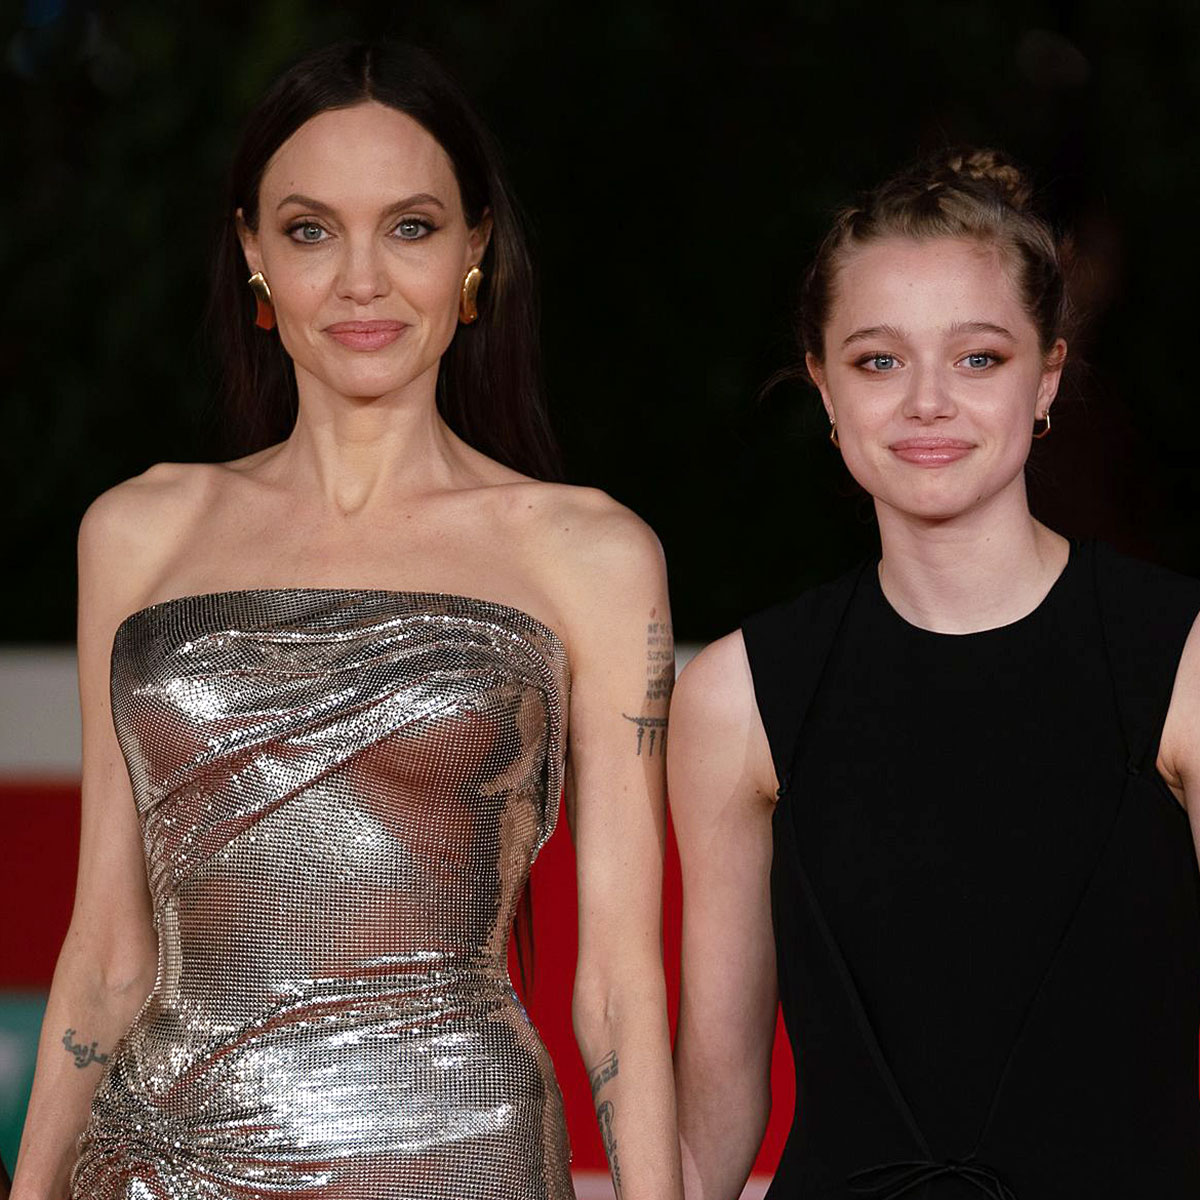 Angelina Jolie holds hands with daughter Zahara, 17, in Rome